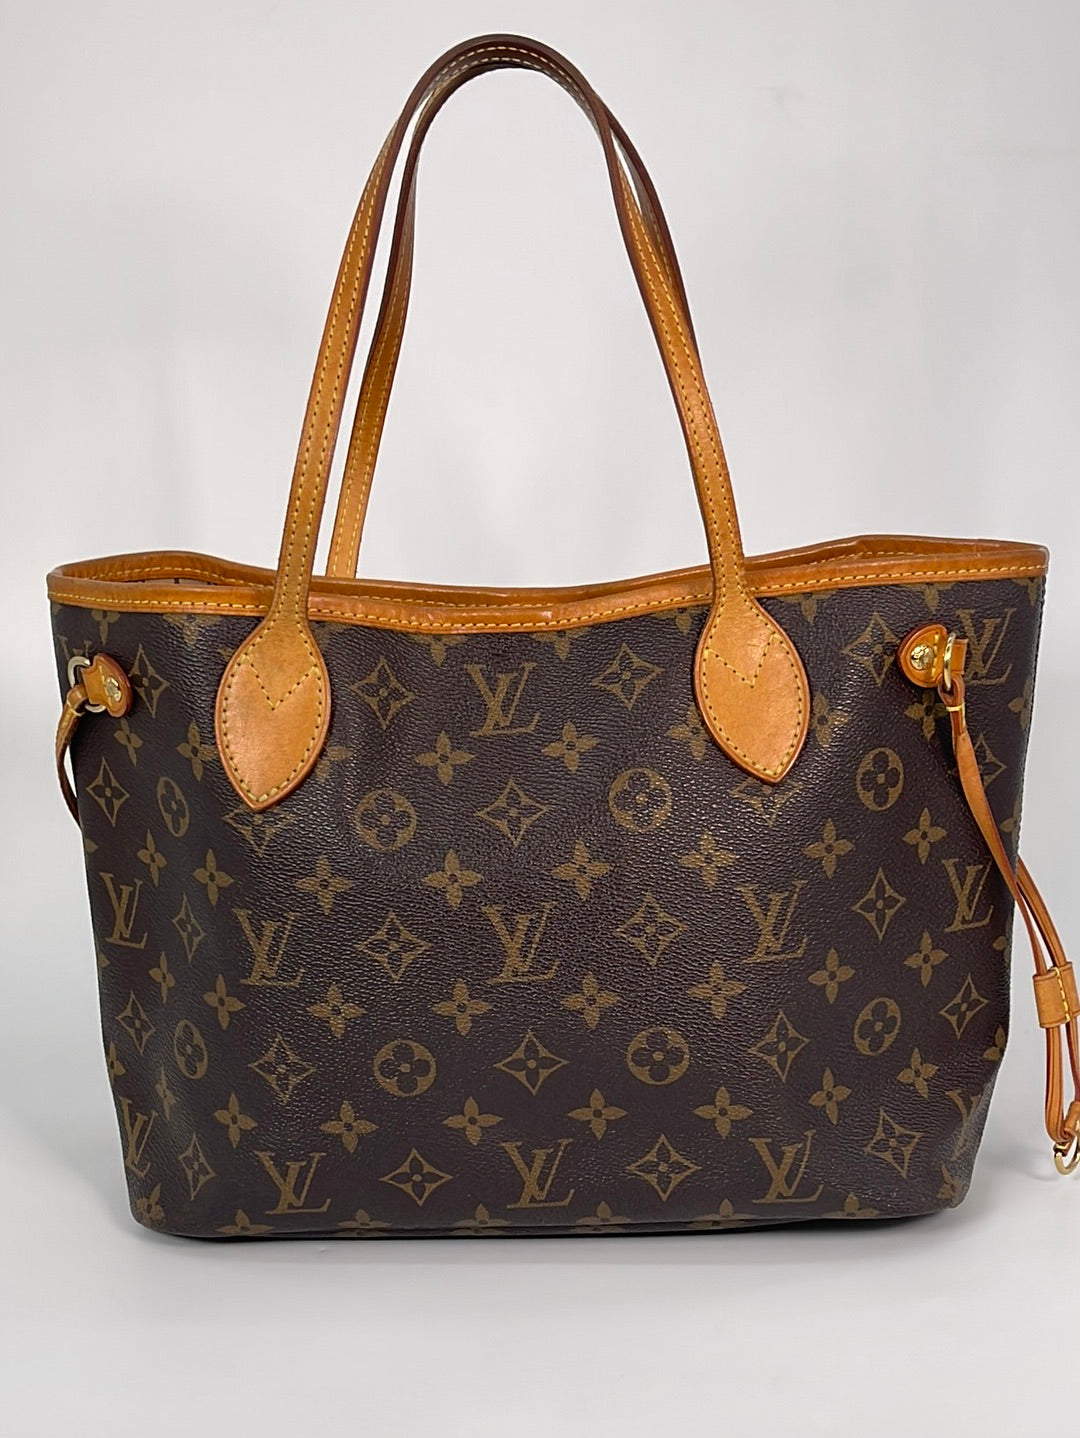 PRELOVED Louis Vuitton Monogram Neverfull PM Tote MB0068 011323